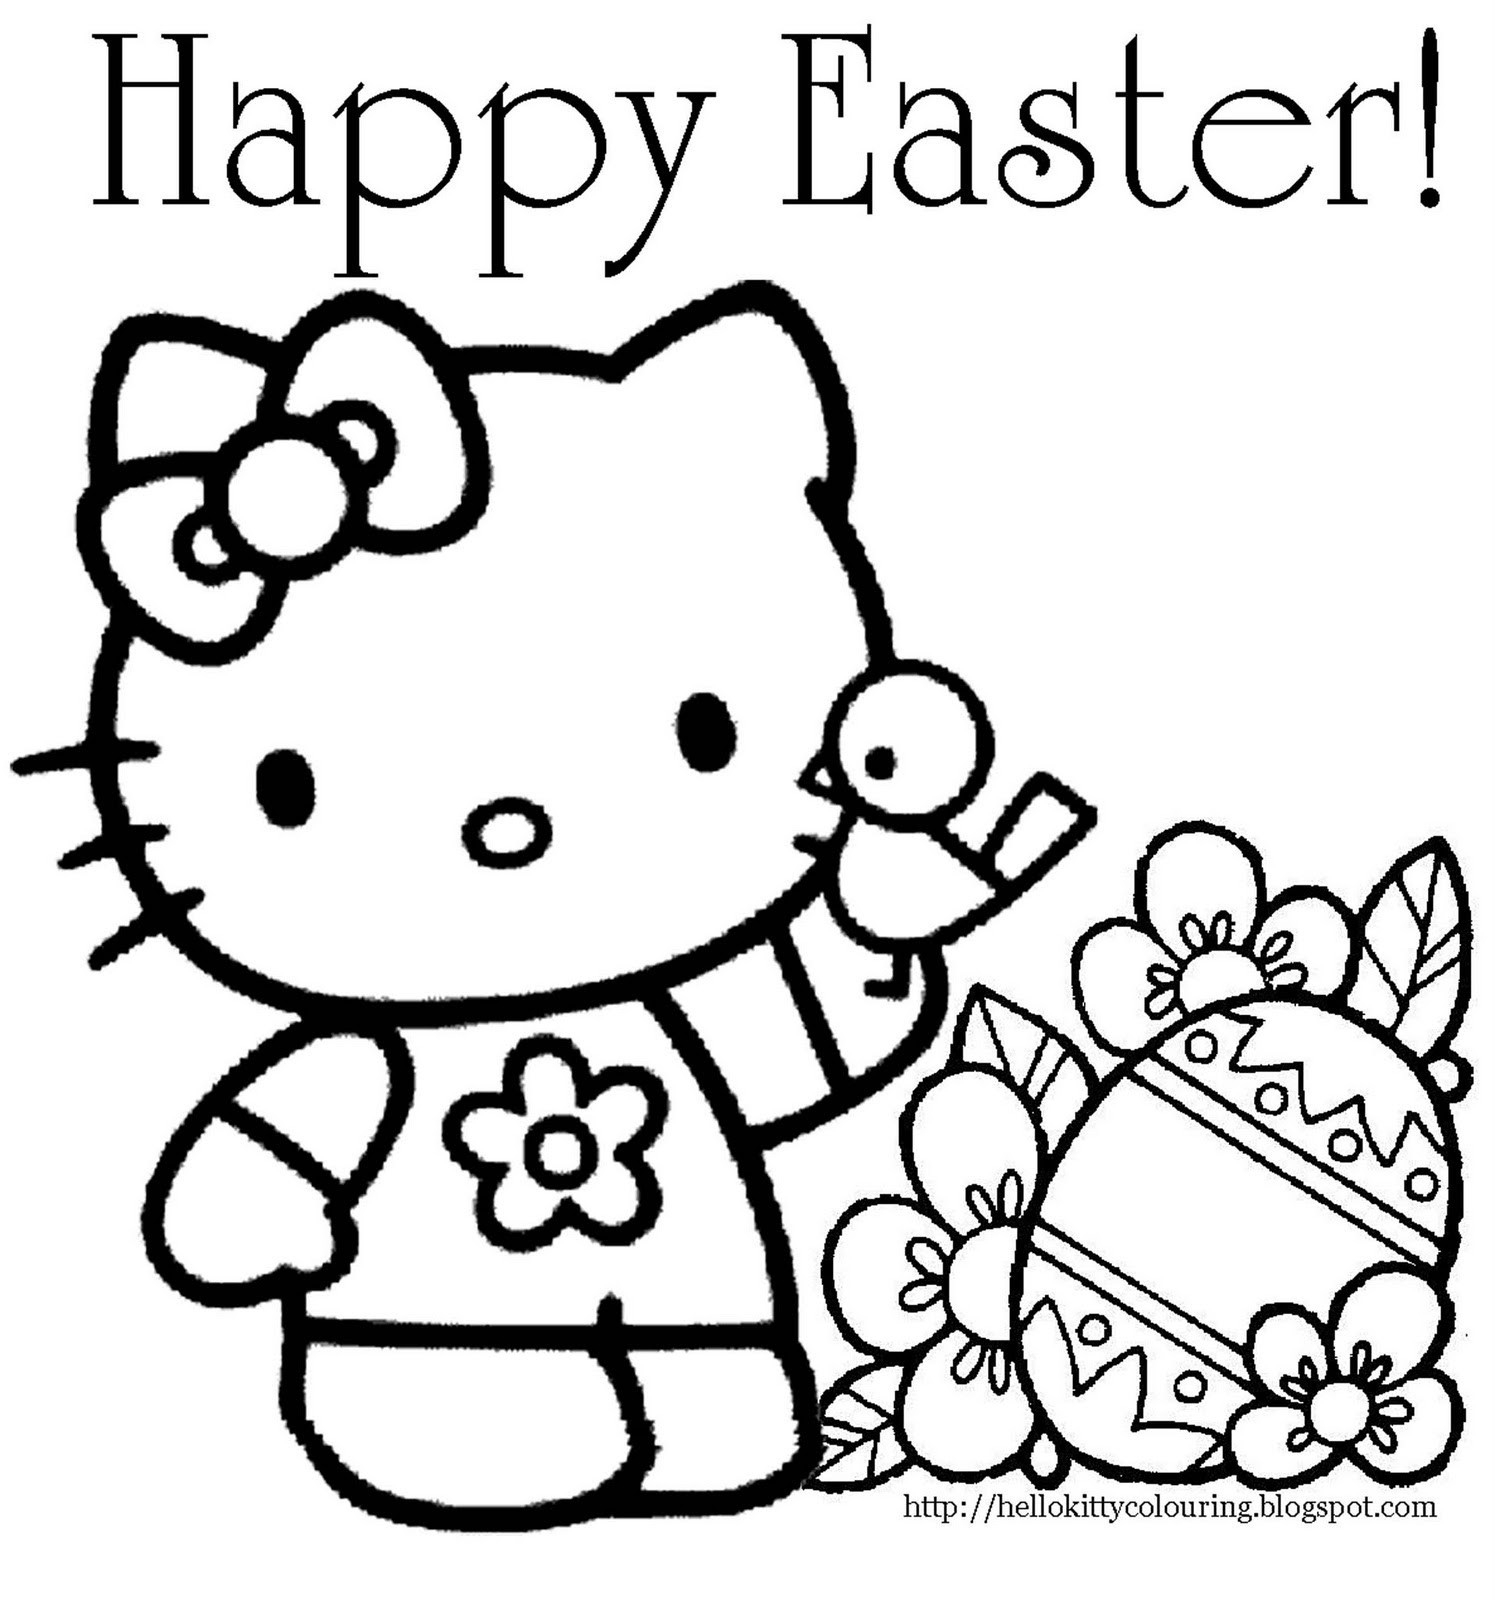 Easter Coloring Pages Free Printable - Lezincnyc - Free Printable Easter Drawings